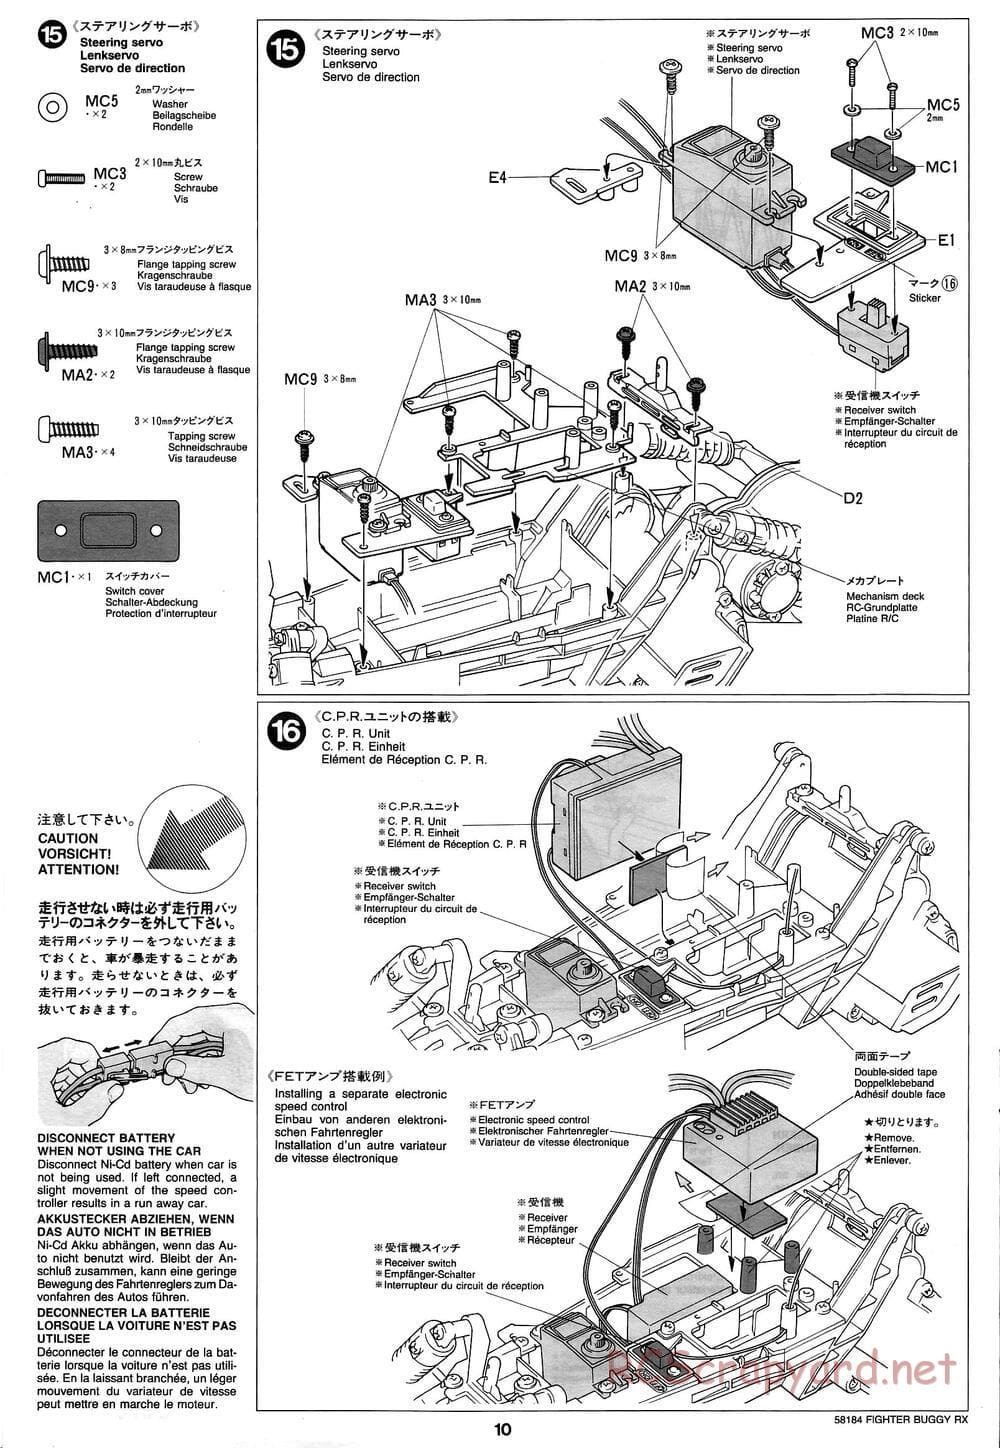 Tamiya - Fighter Buggy RX Chassis - Manual - Page 10